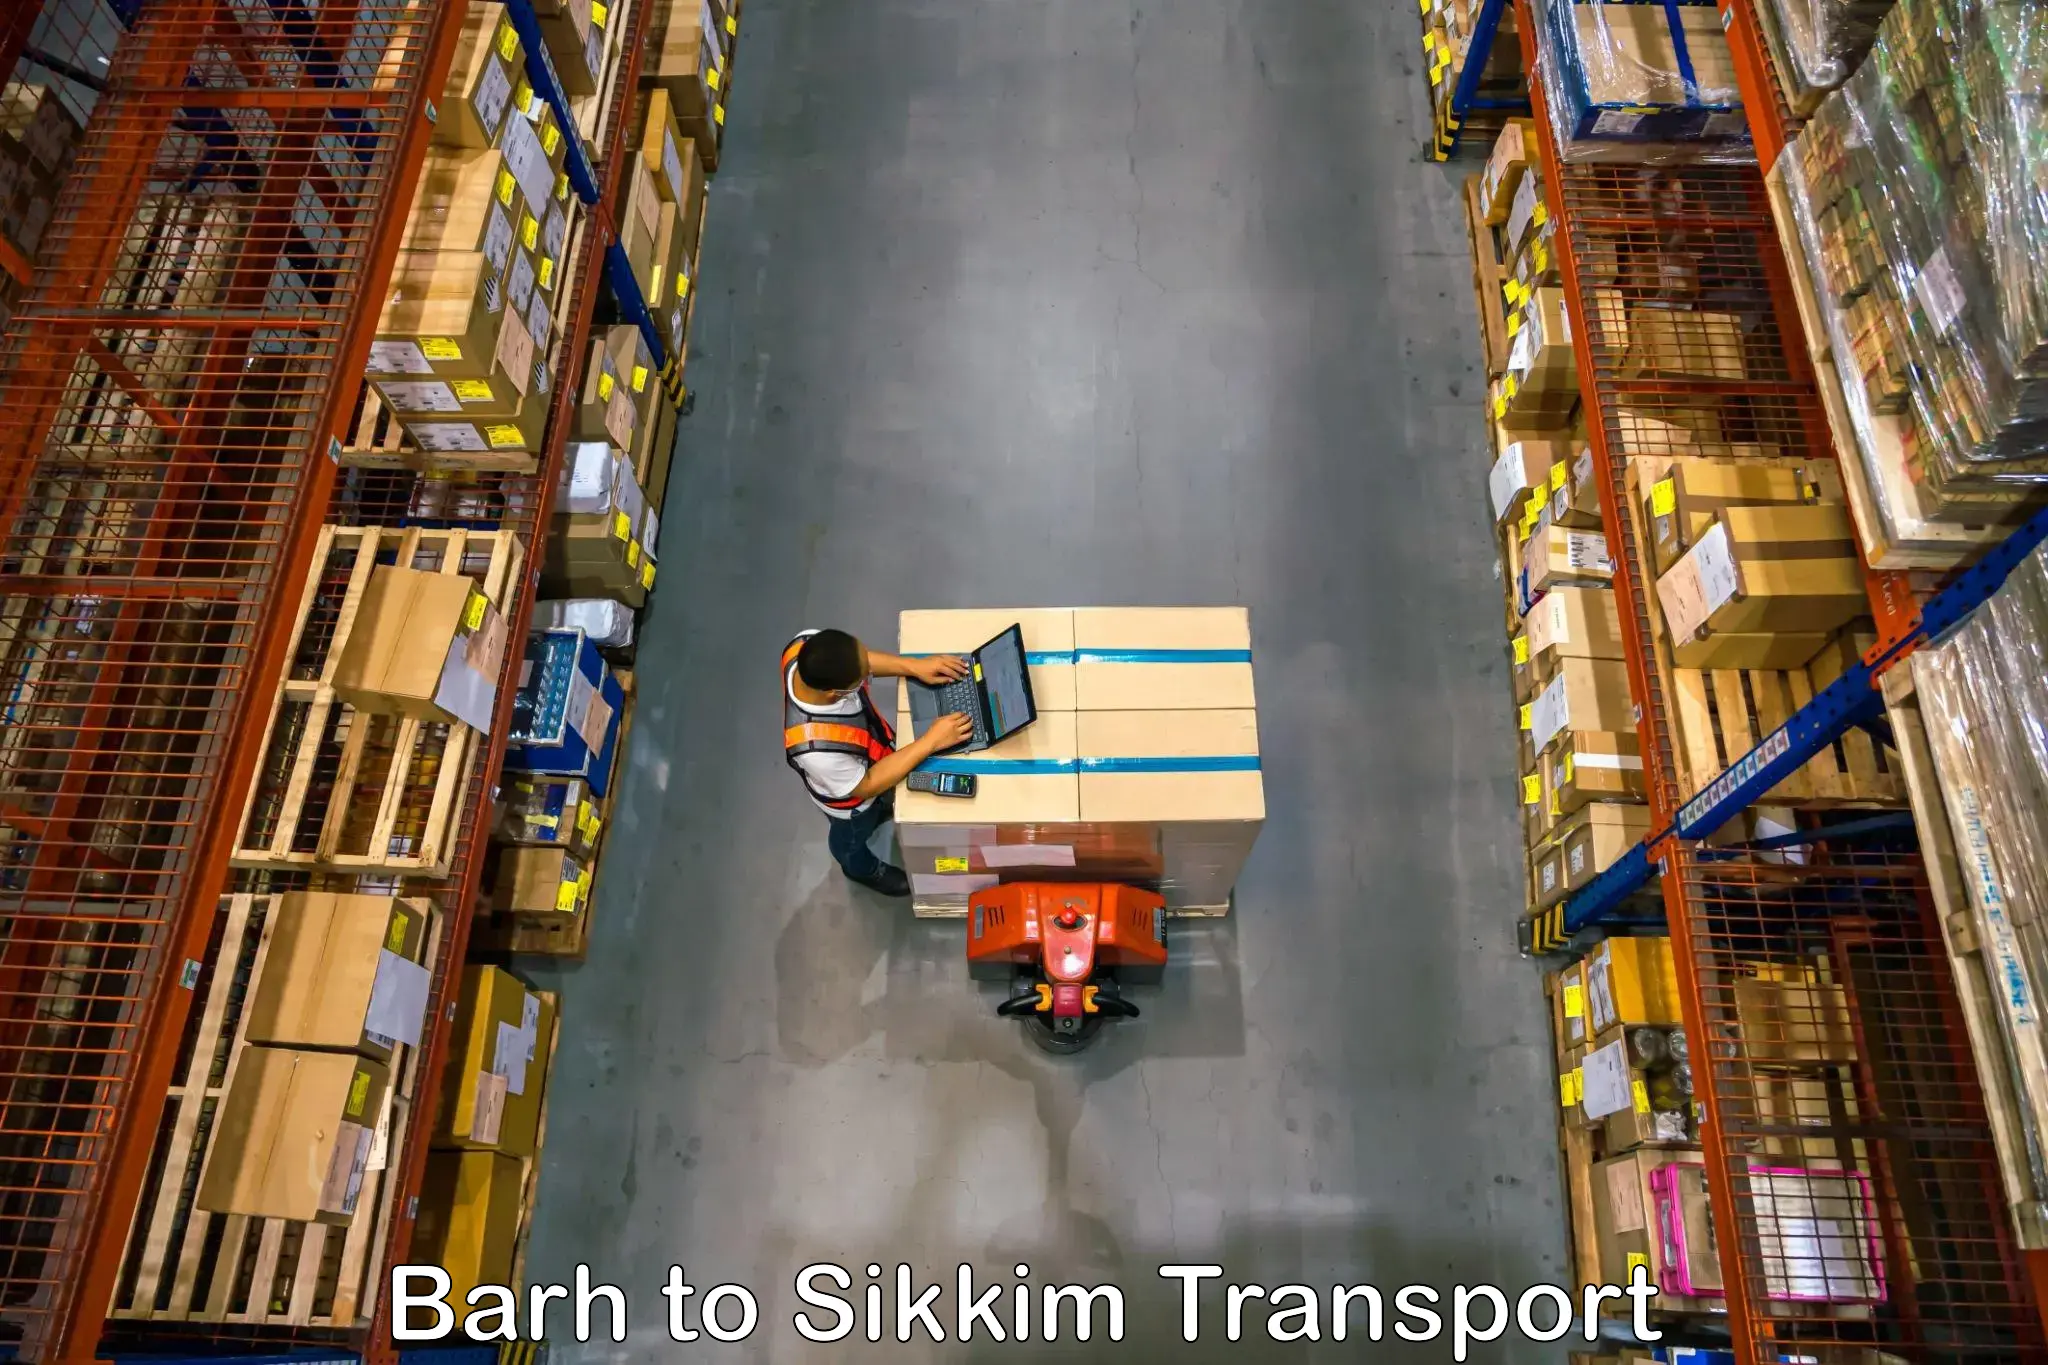 Container transport service Barh to Sikkim